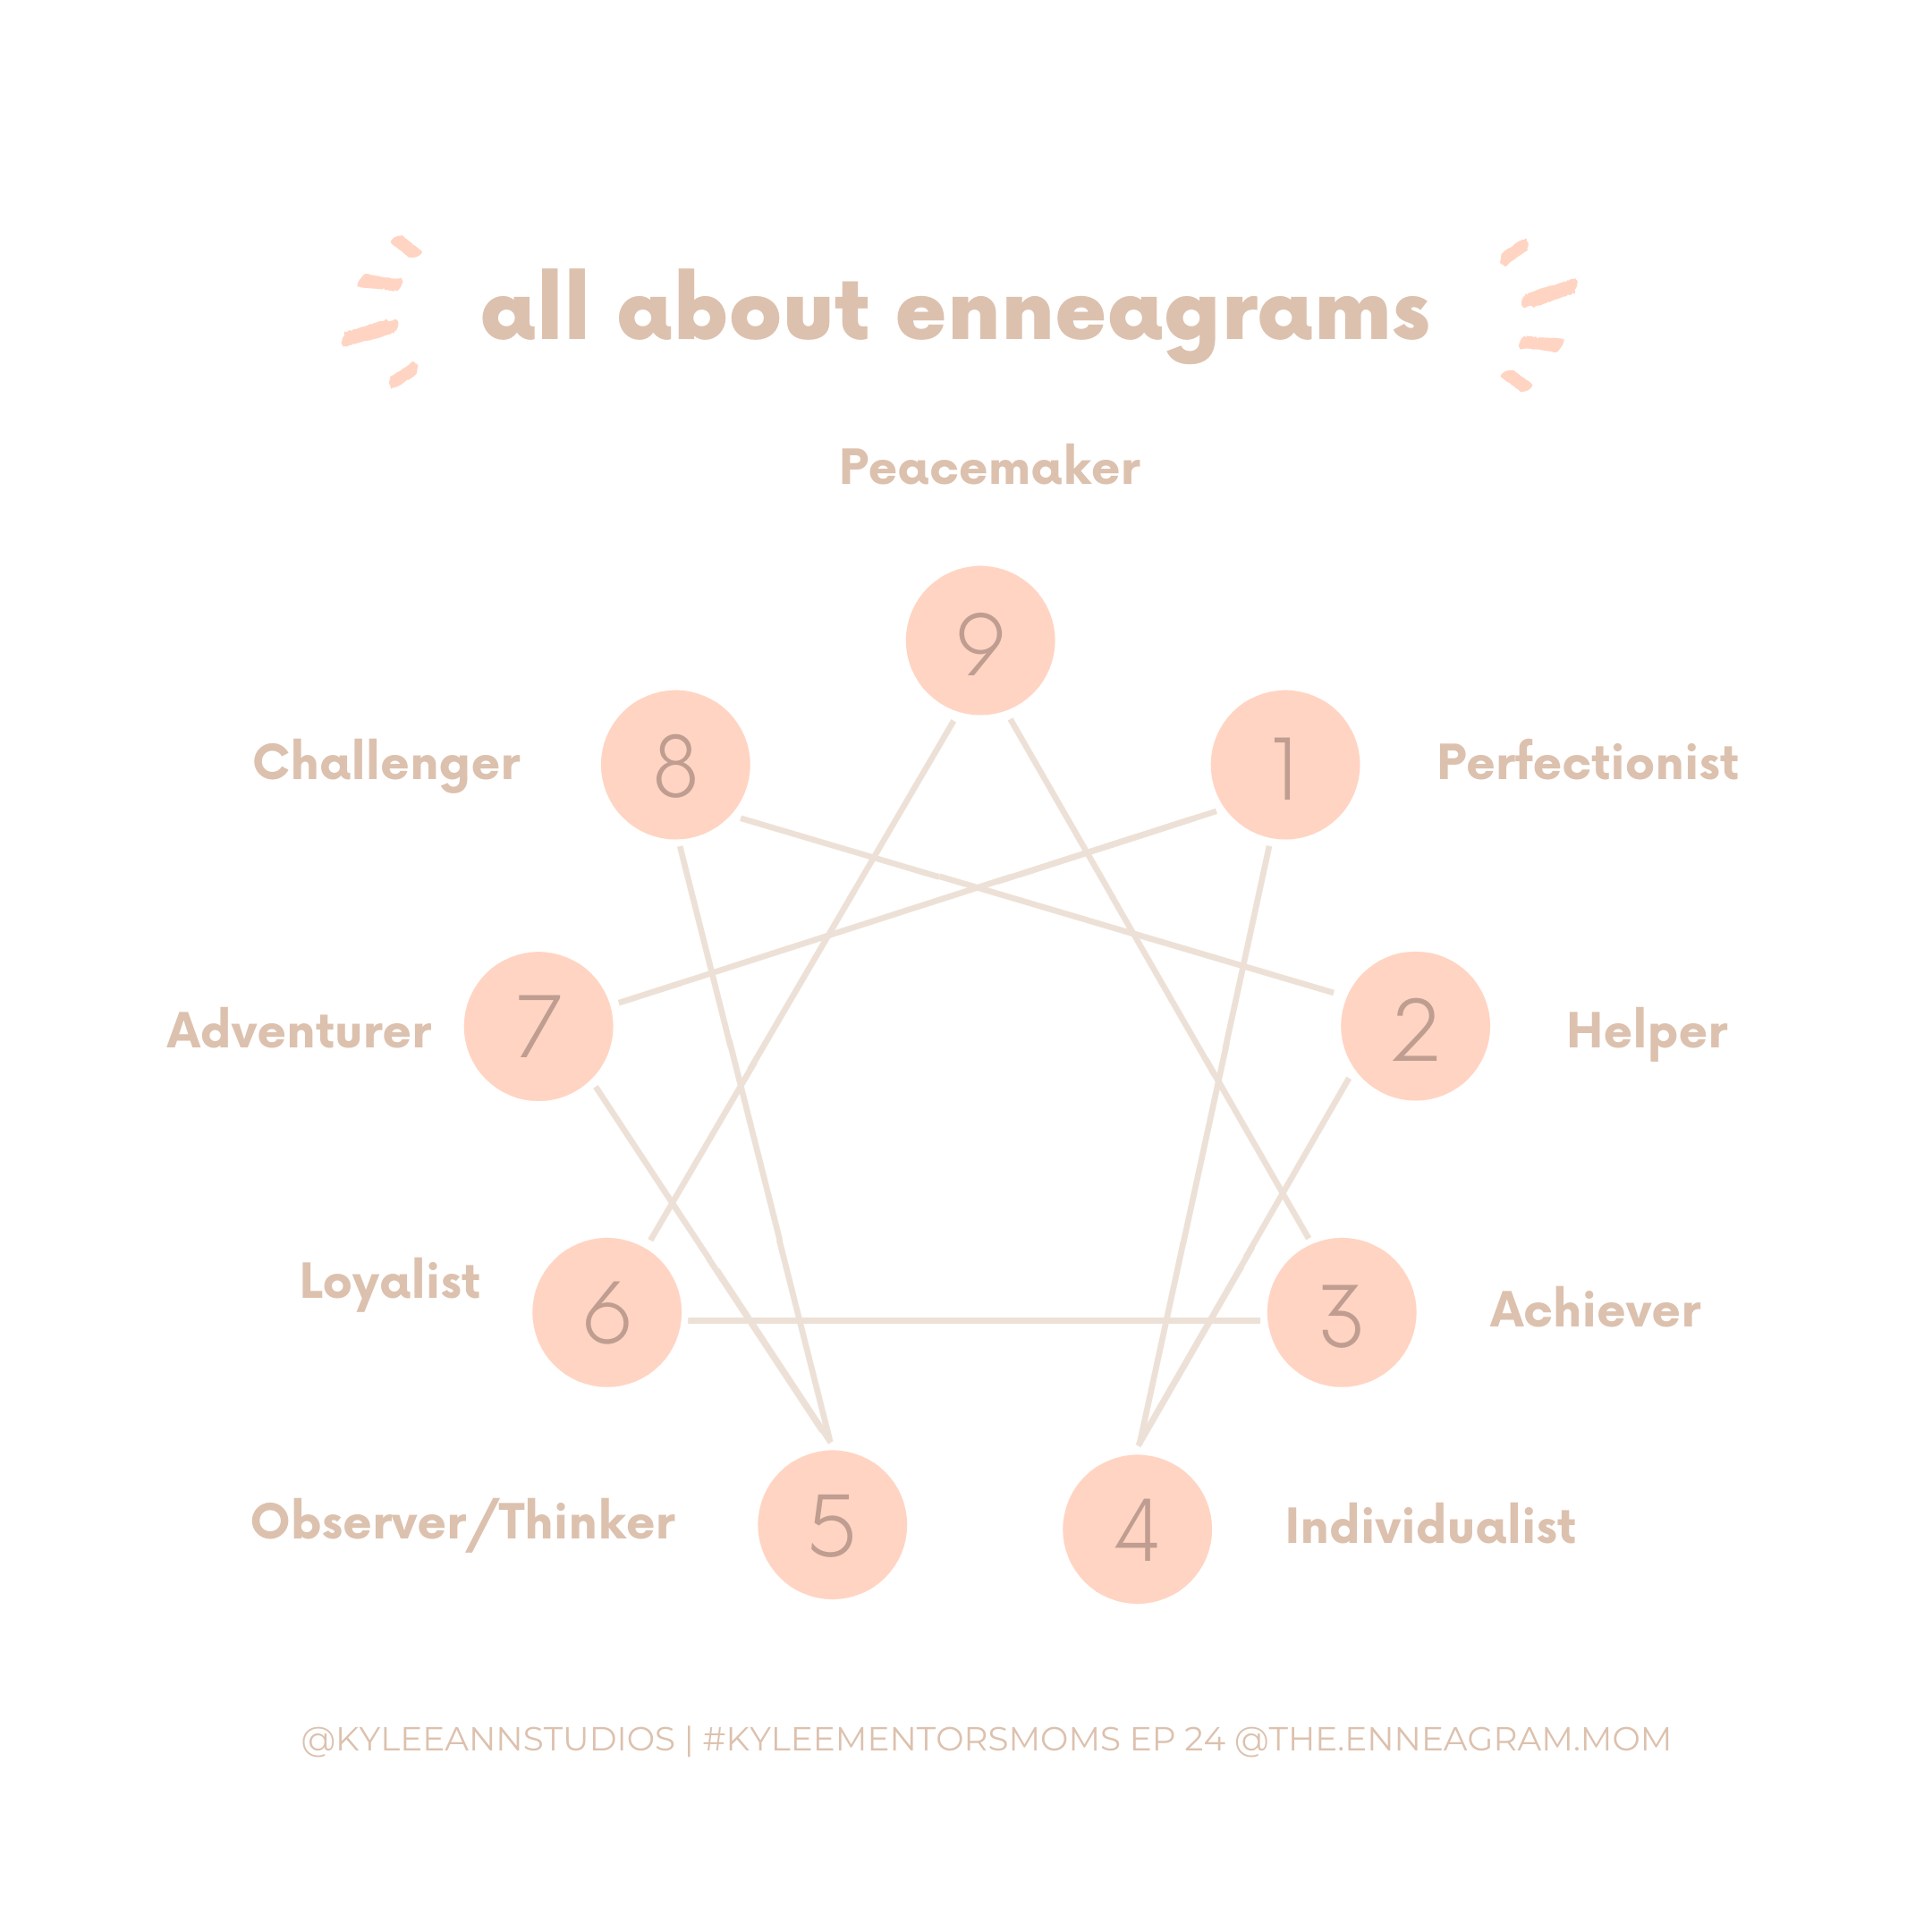 All About Enneagrams